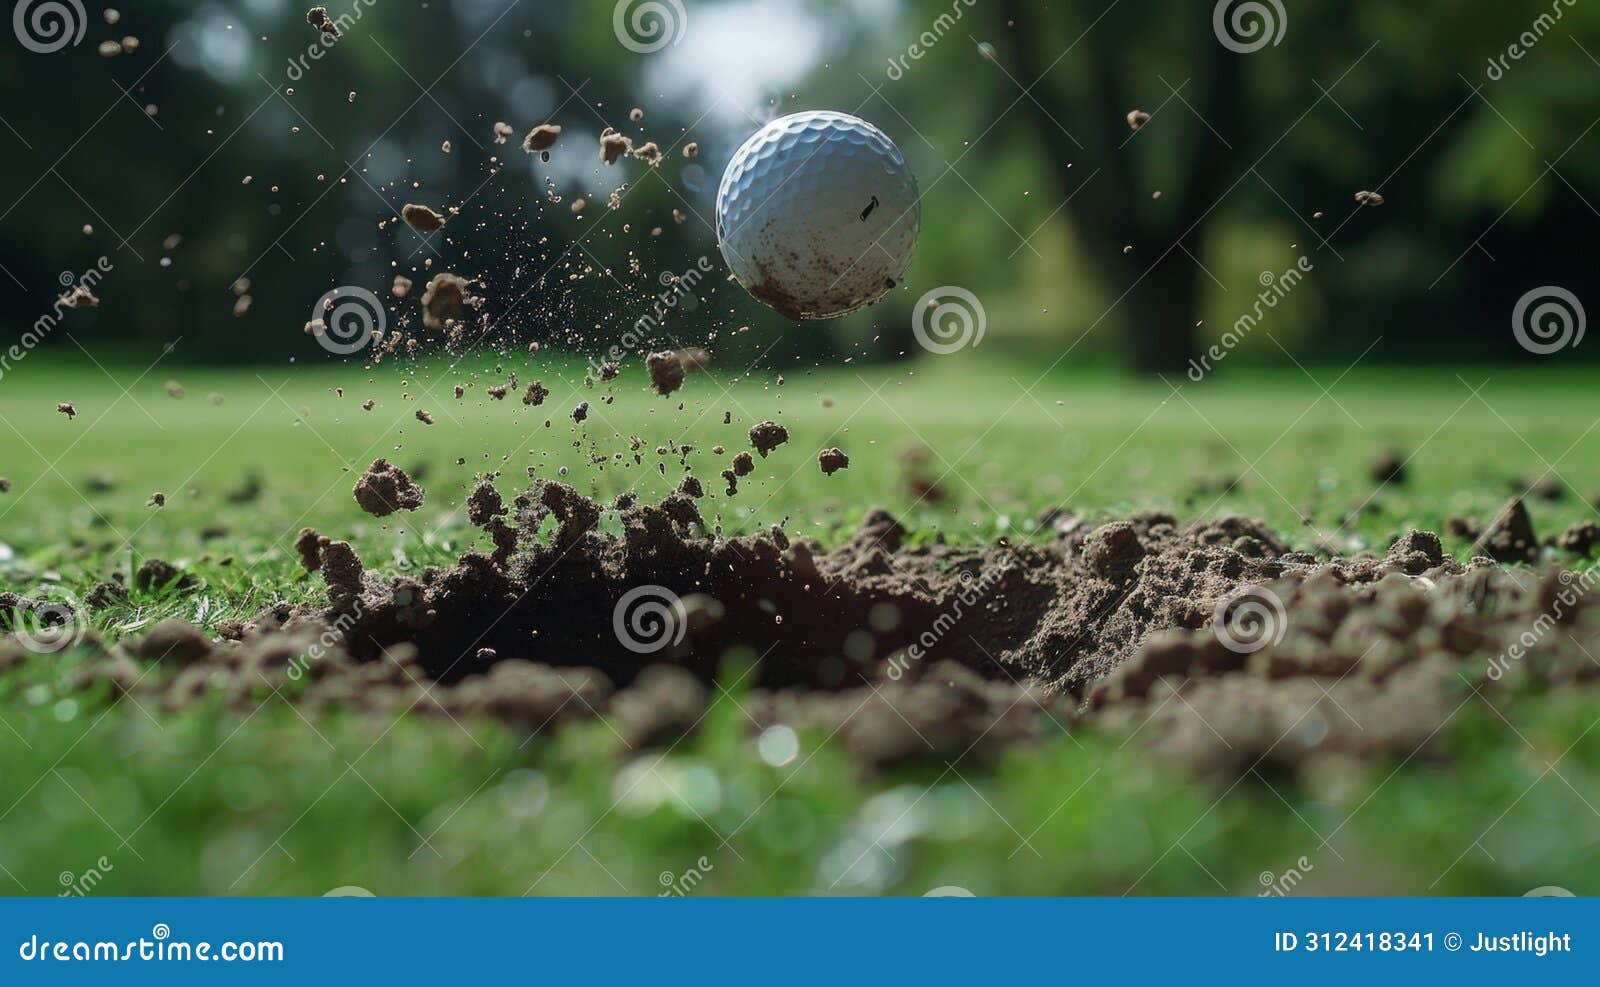 a closeup of a divot being lifted from the ground by a powerful swing